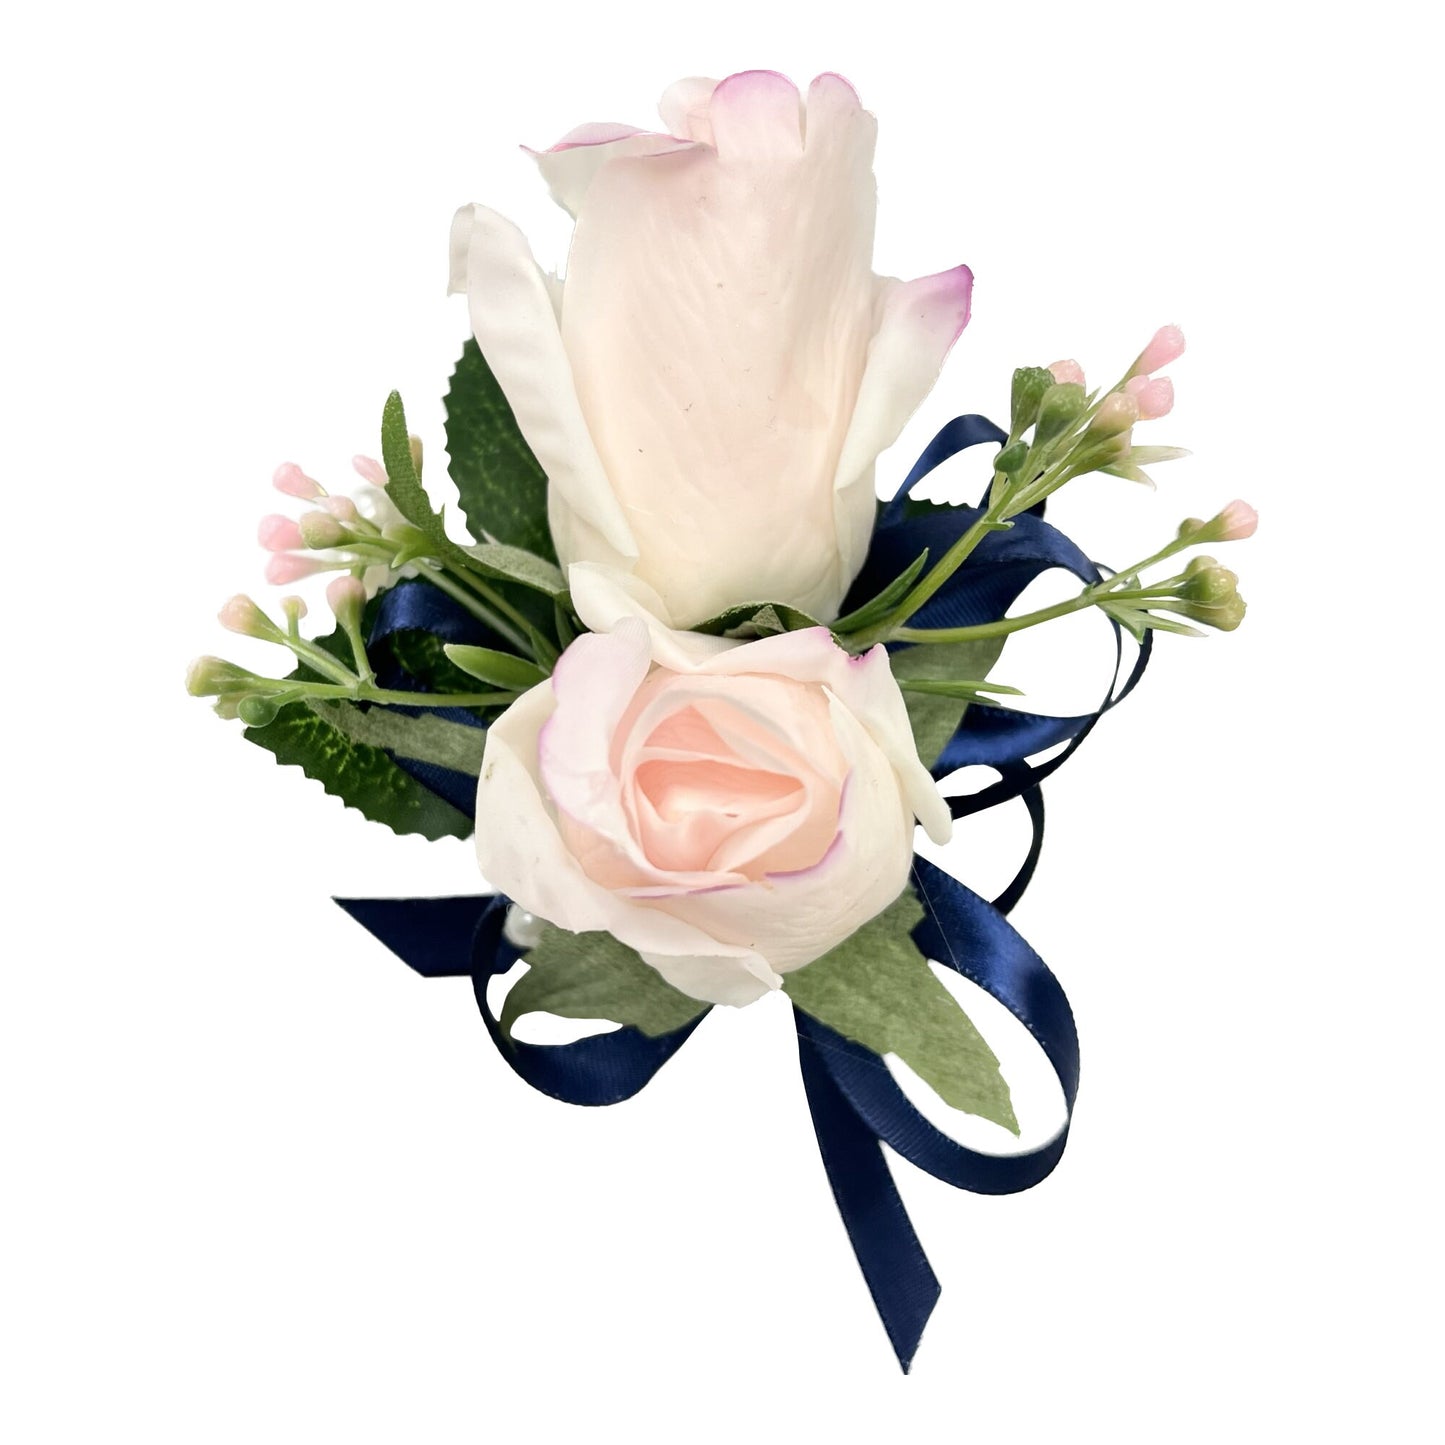 Elegant Real-Touch Rose Corsage & Boutonniere Set - Customize Your Color